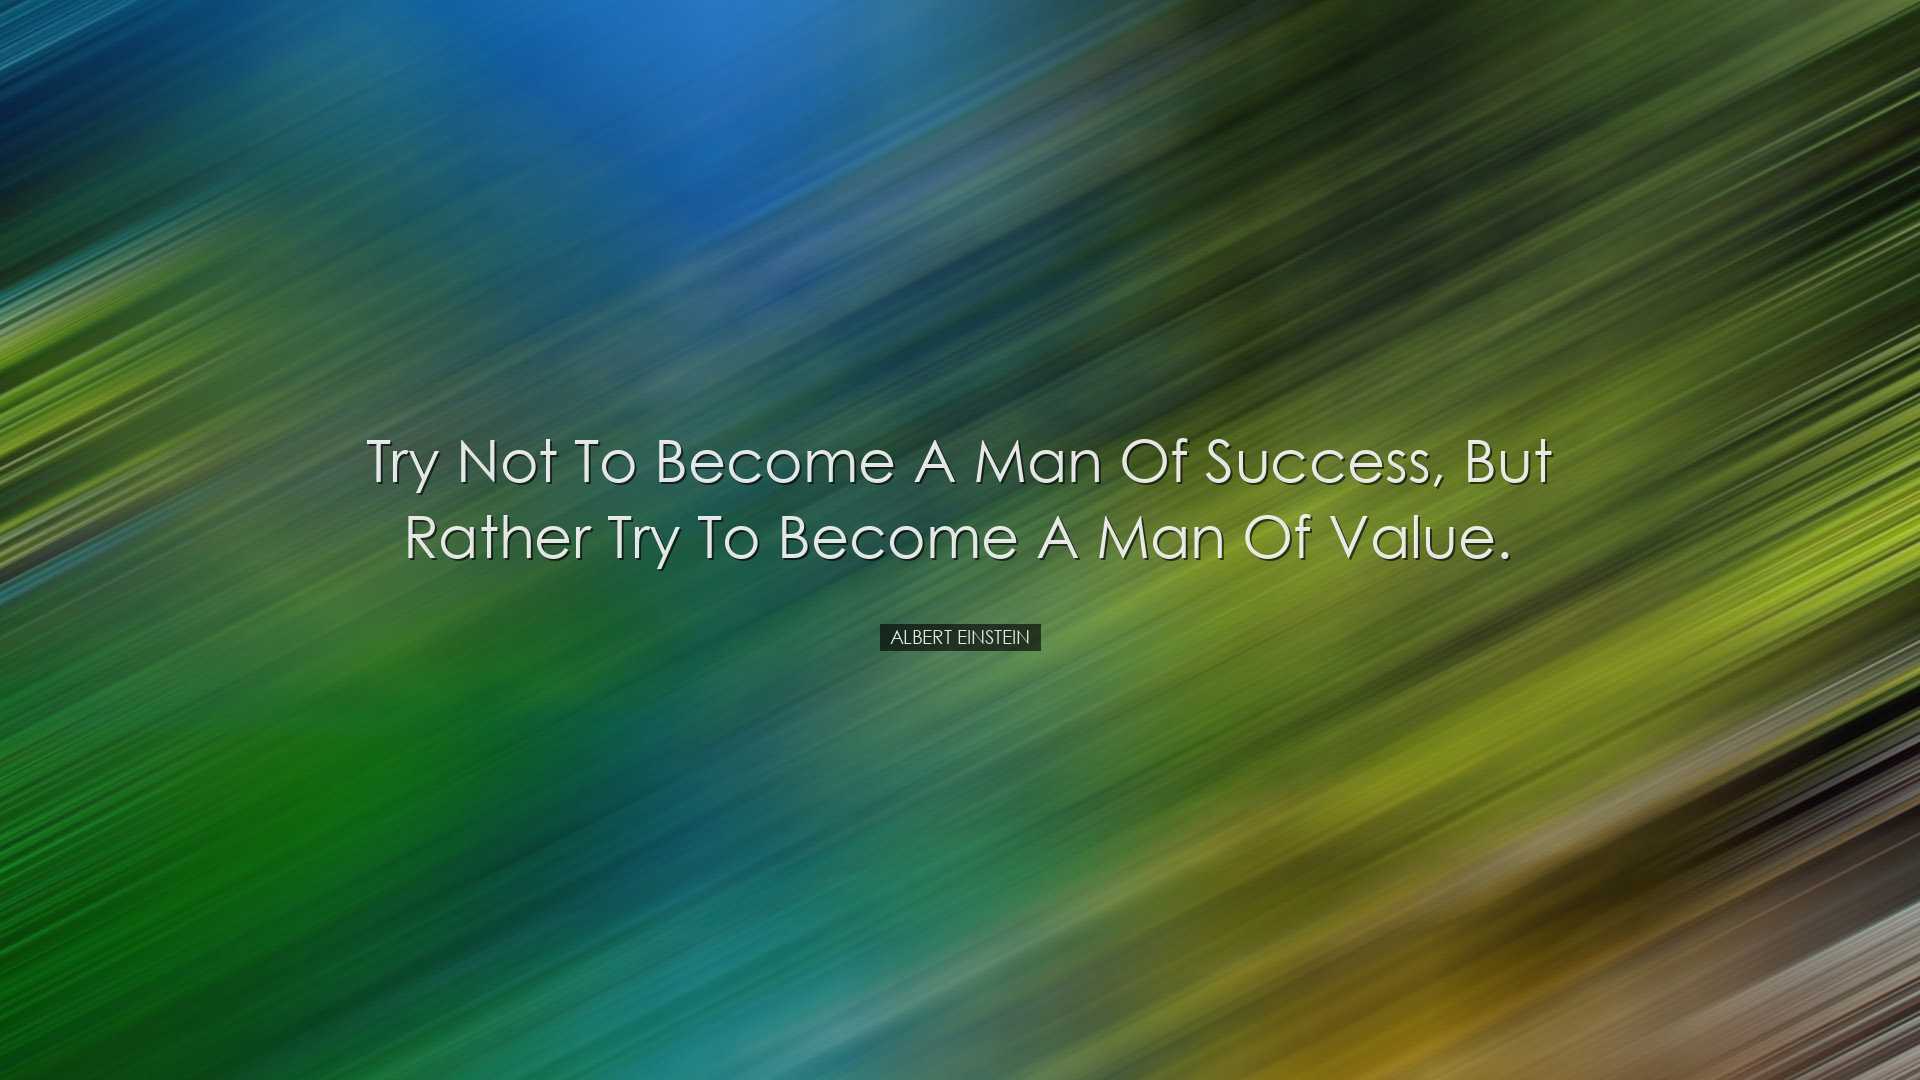 Try not to become a man of success, but rather try to become a man